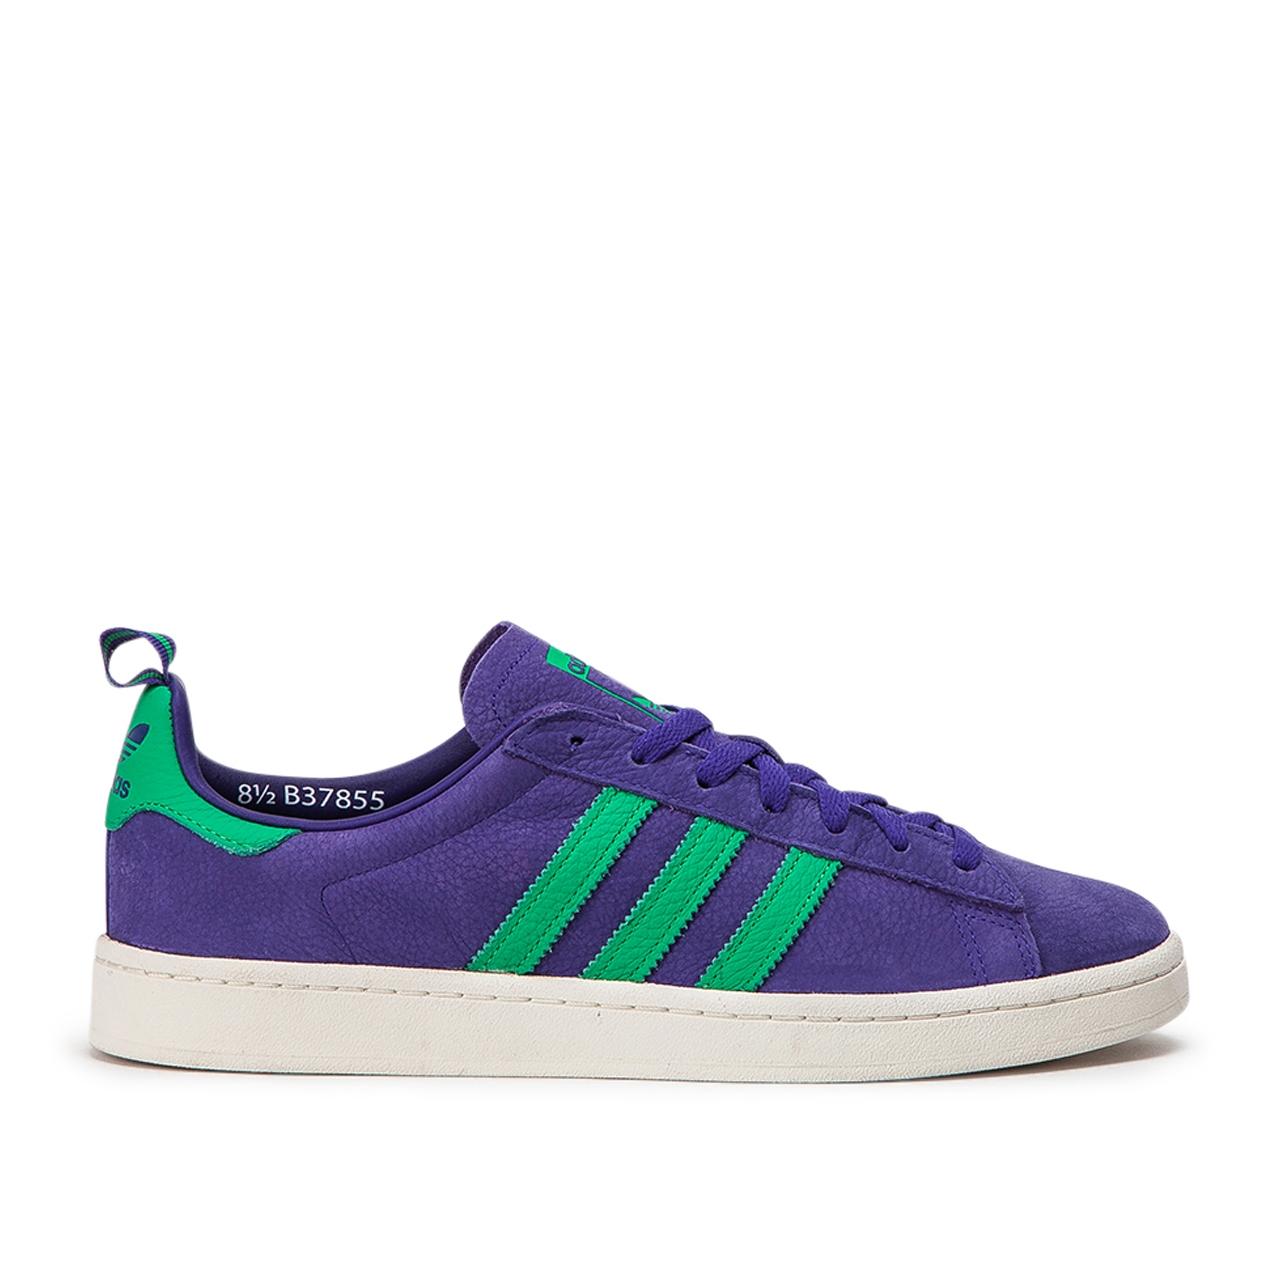 adidas Leather Campus in Purple for Men - Lyst